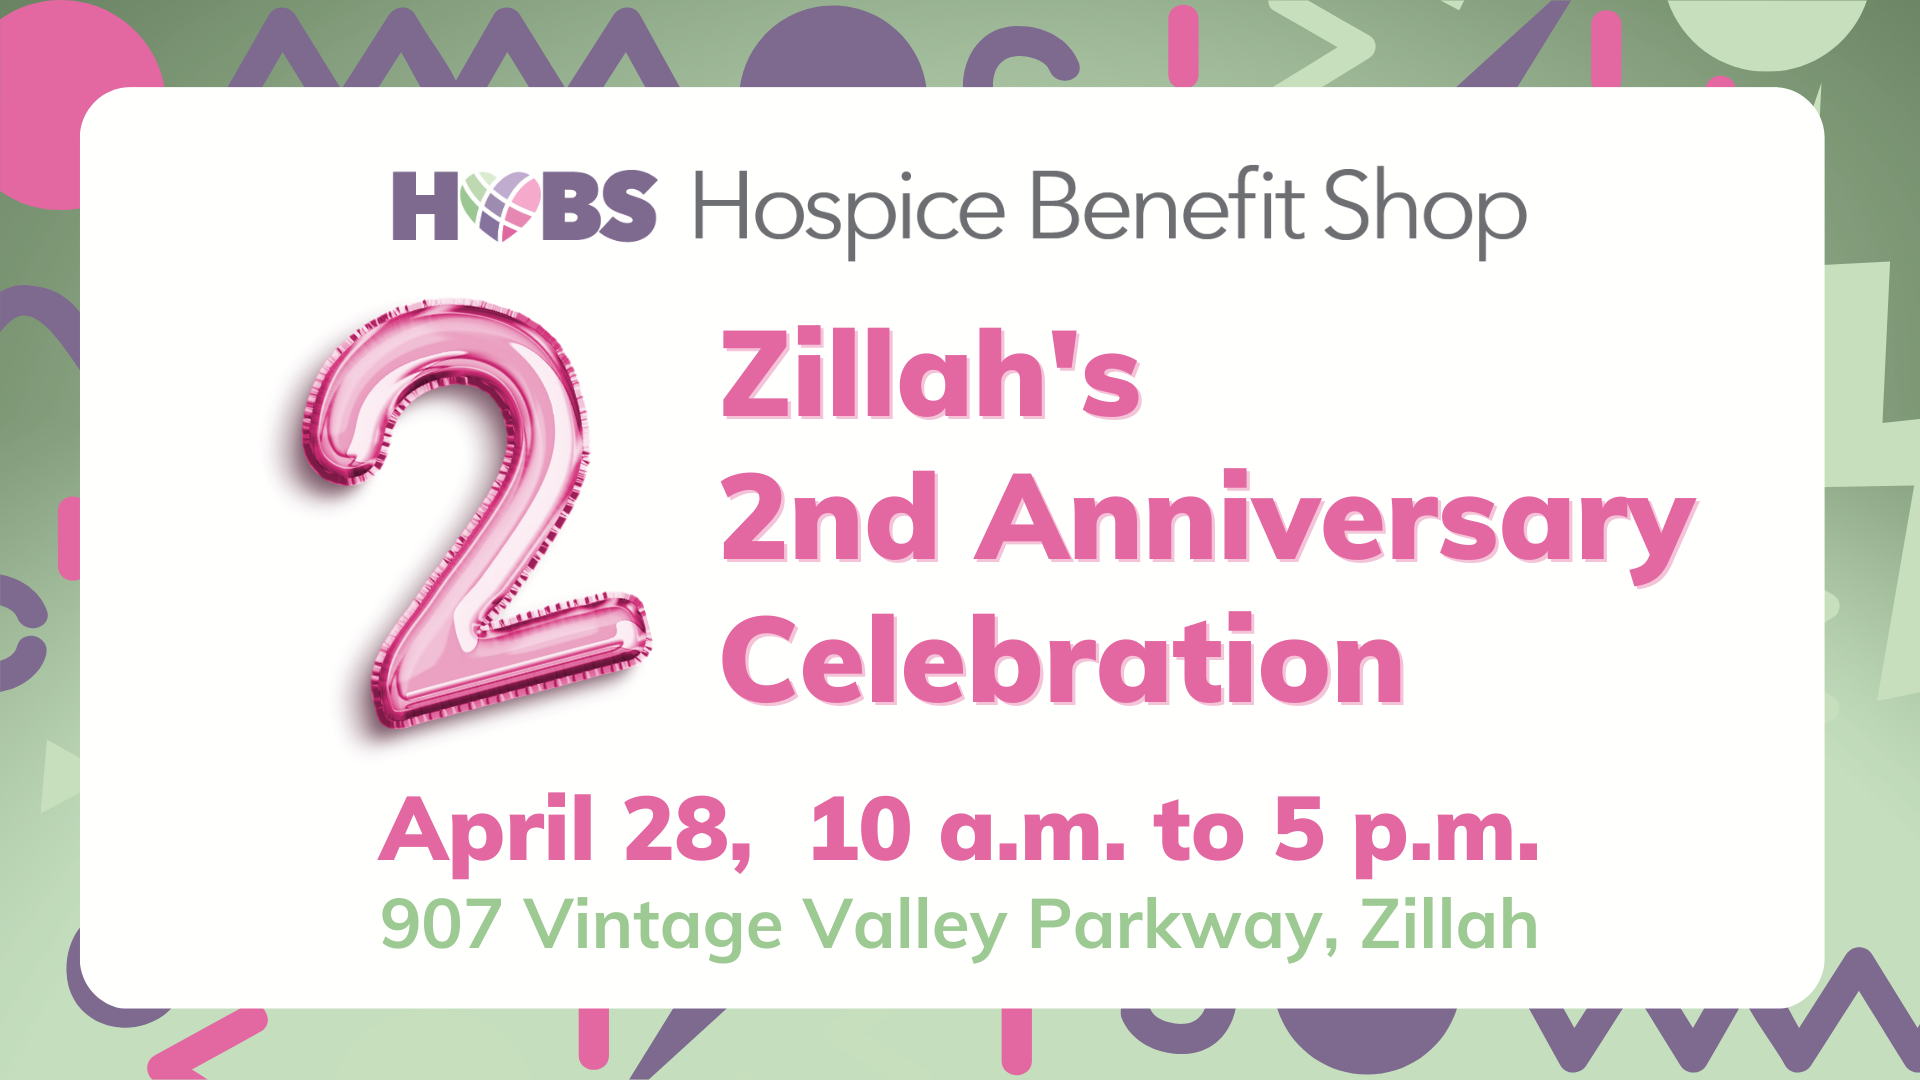 HOBS Hospice Benefit Shop - Zillah's 2nd Anniversary Celebration - April 28, 10 a.m. to 5 p.m., 907 Vintage Valley Parkway, Zillah.